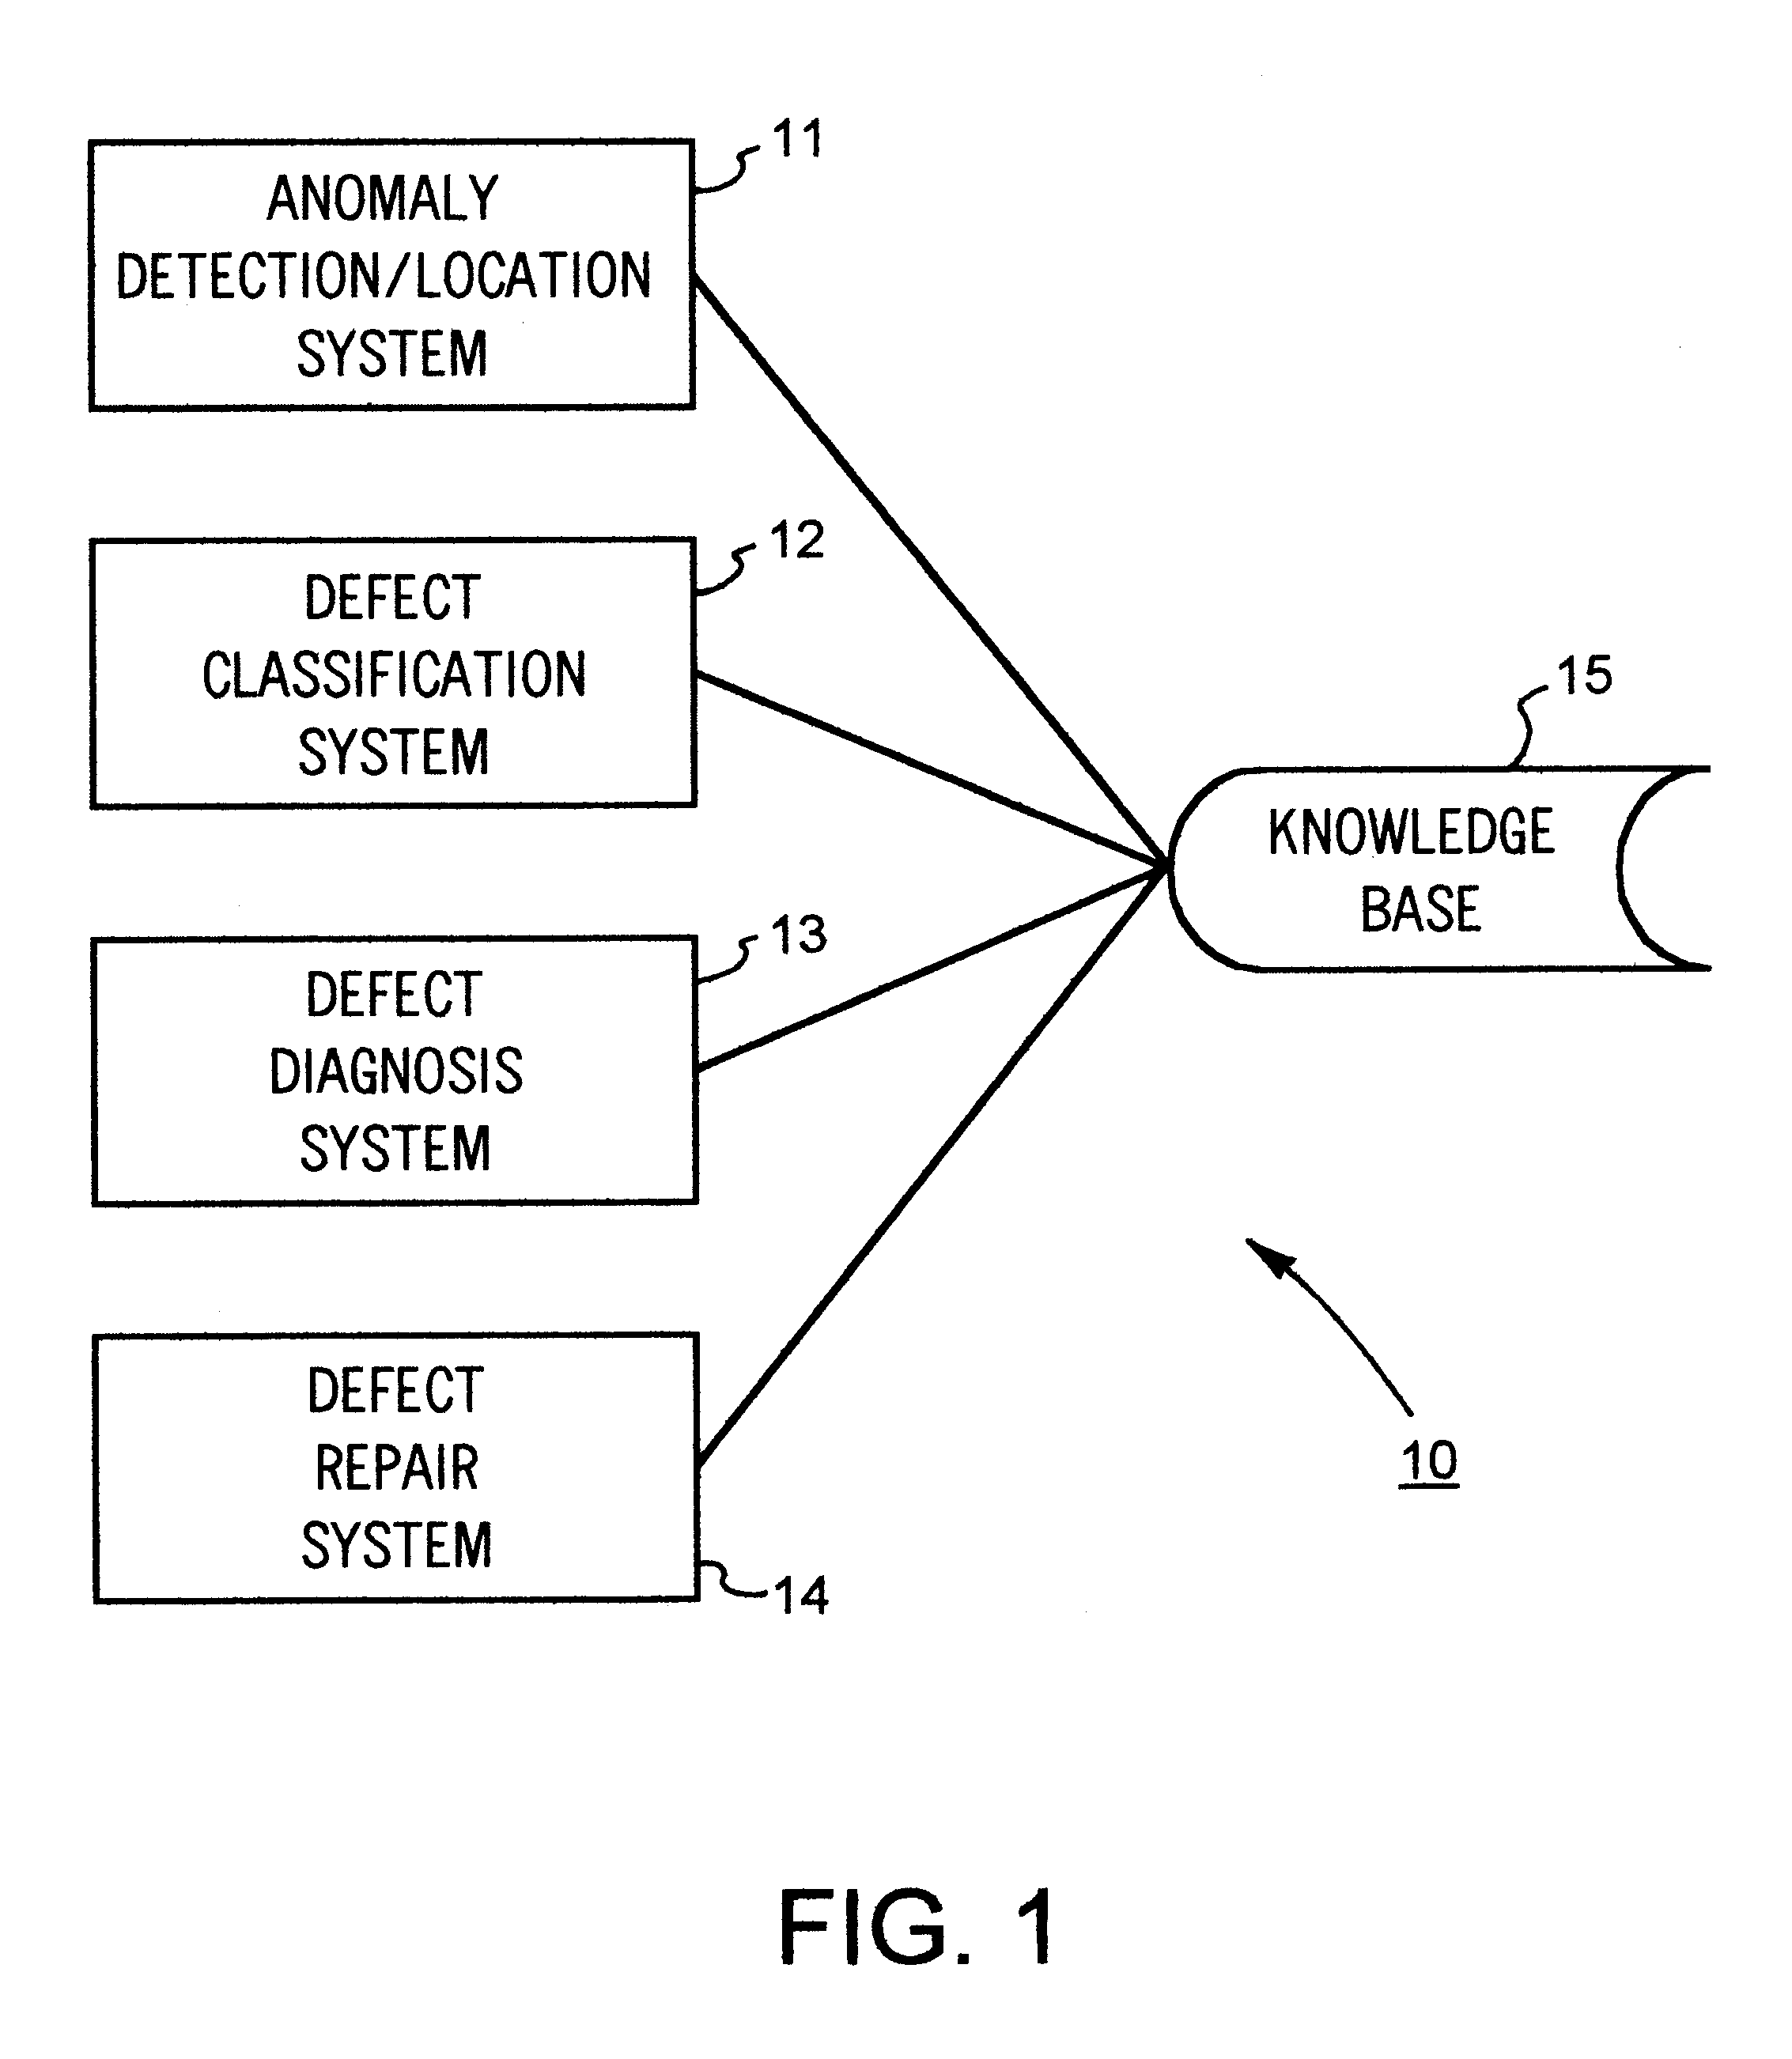 System and method of optically inspecting surface structures on an object